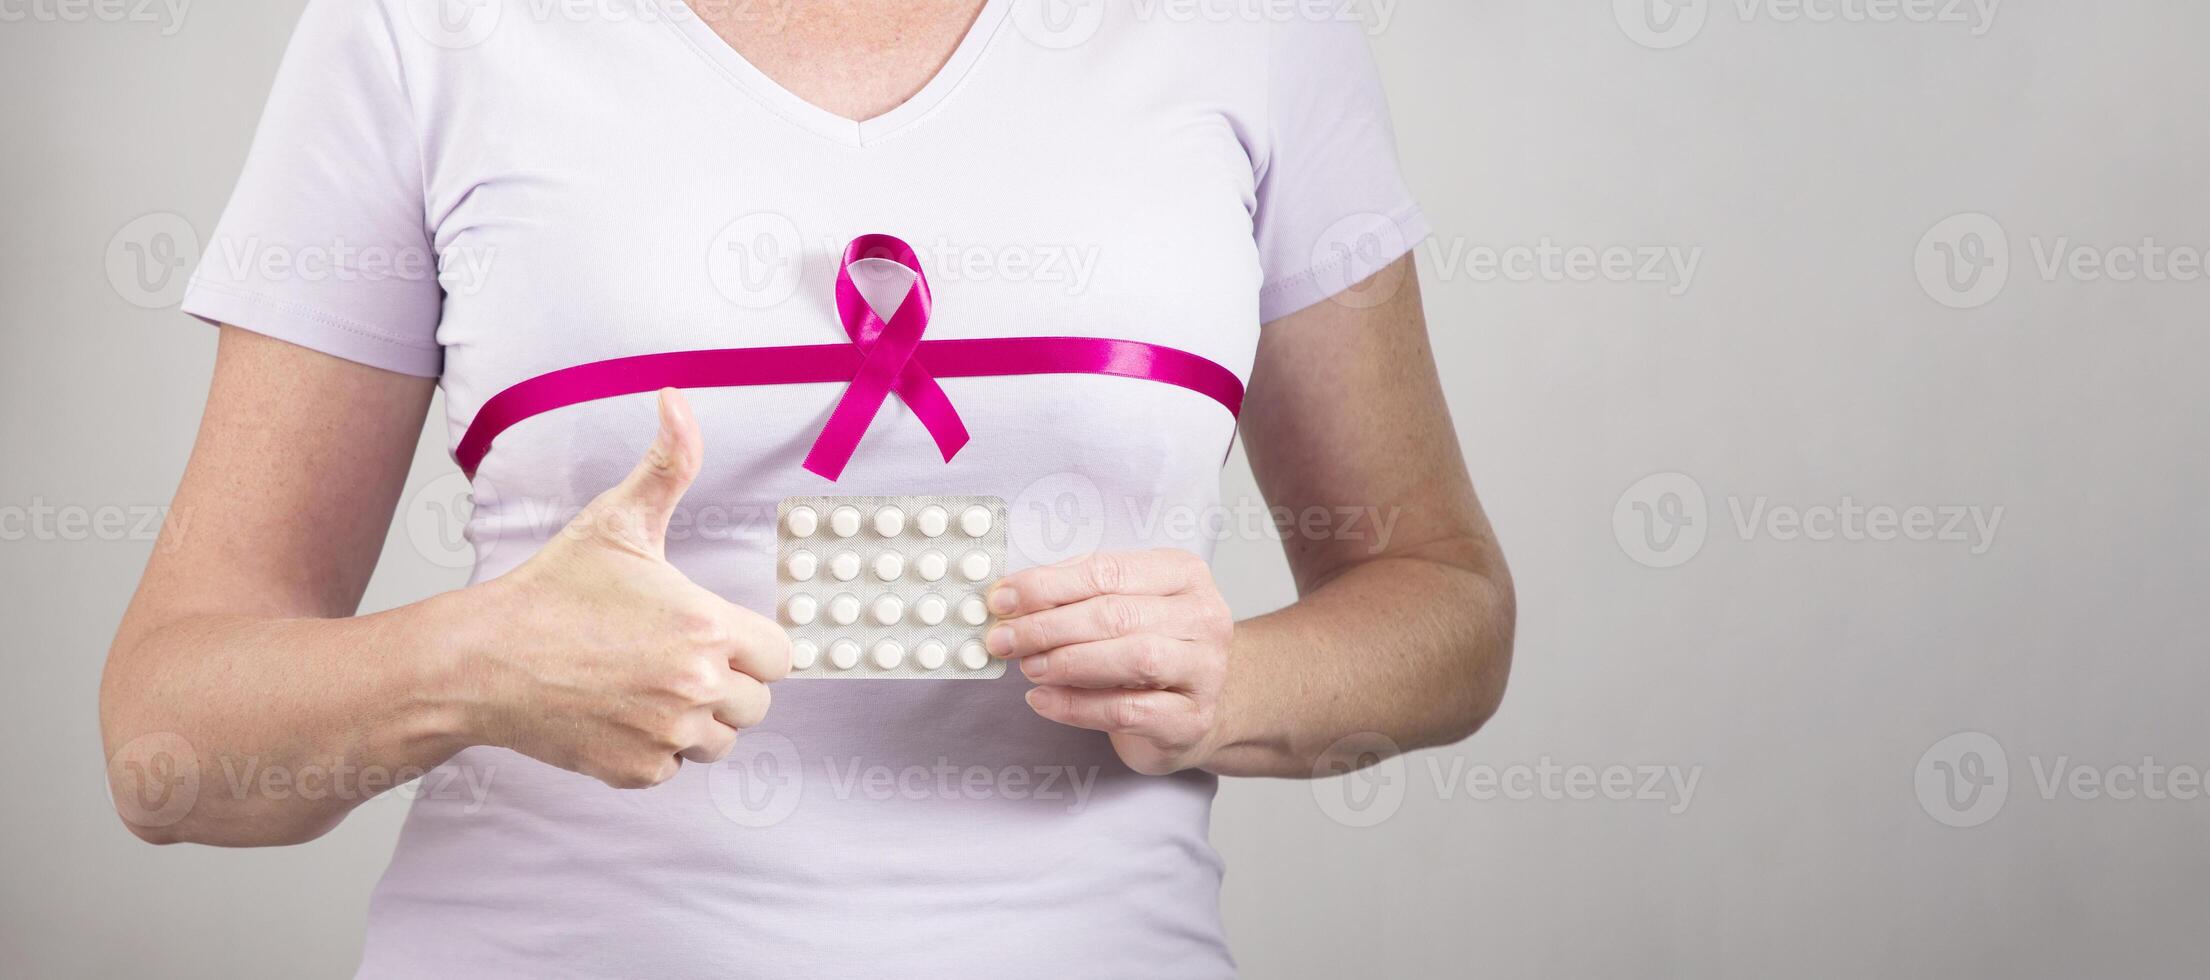 woman making heart sign with fingers on breast cancer protection symbol photo